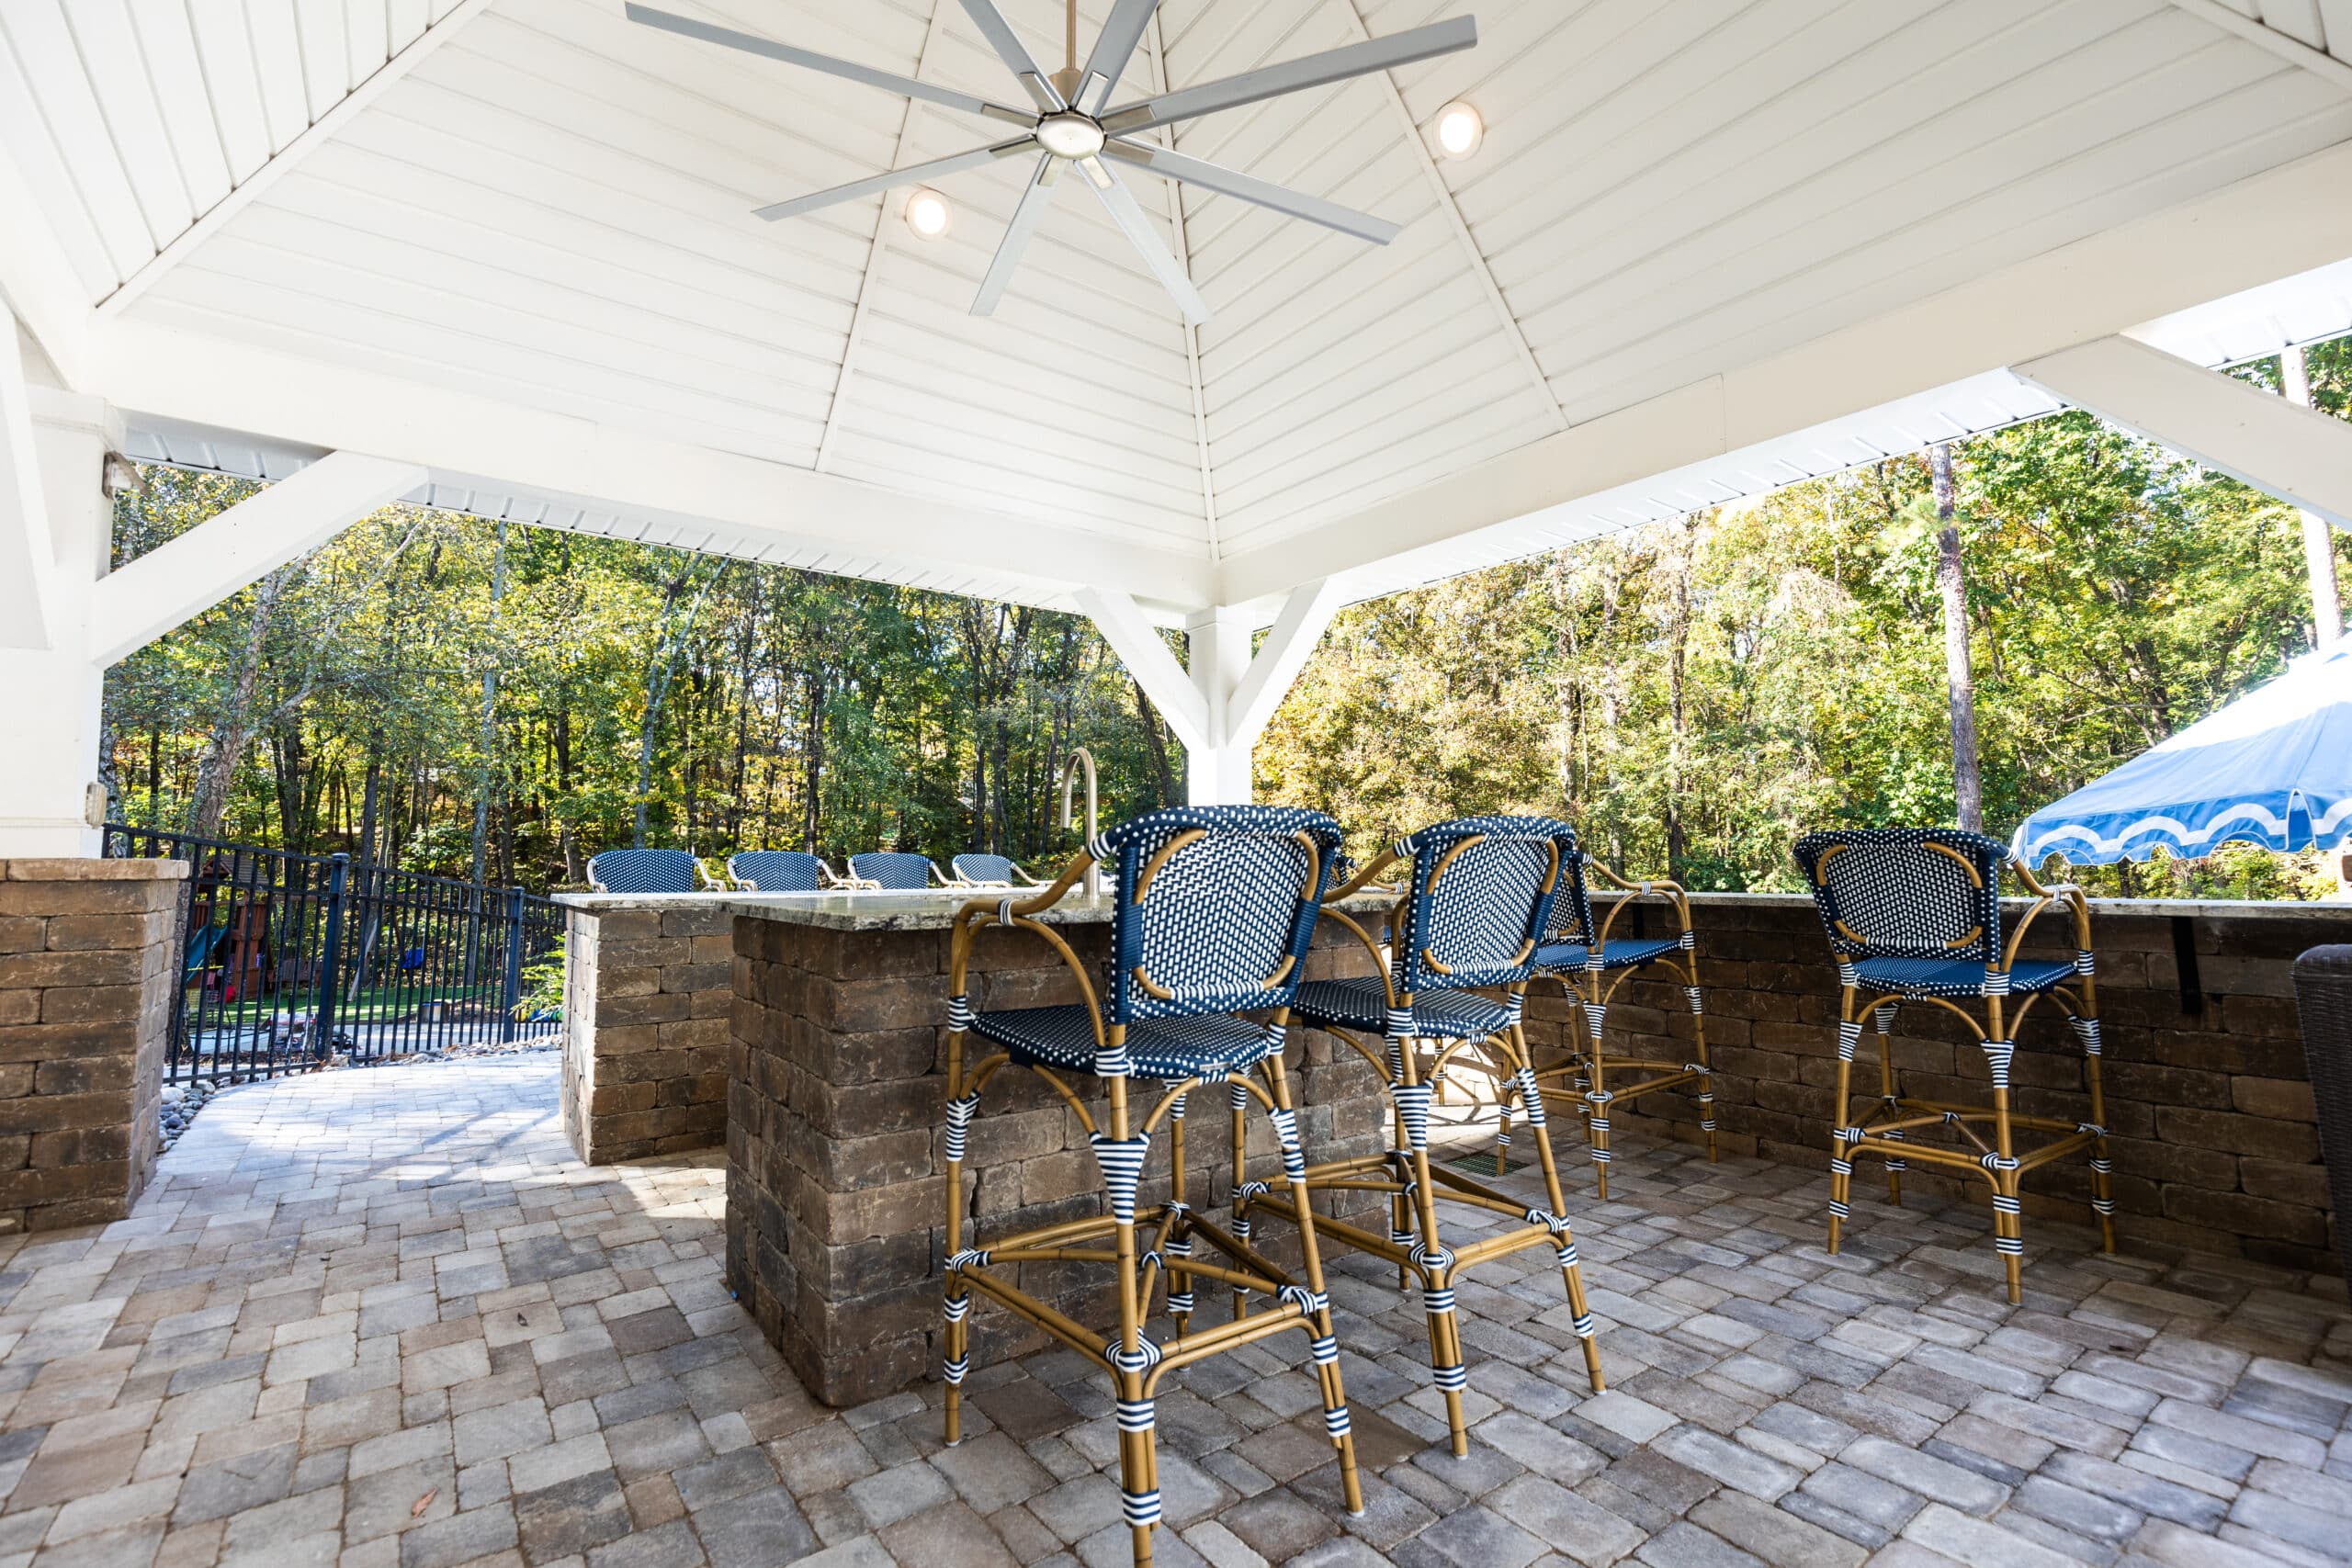 A brick patio with blue chairs and a ceiling fan.